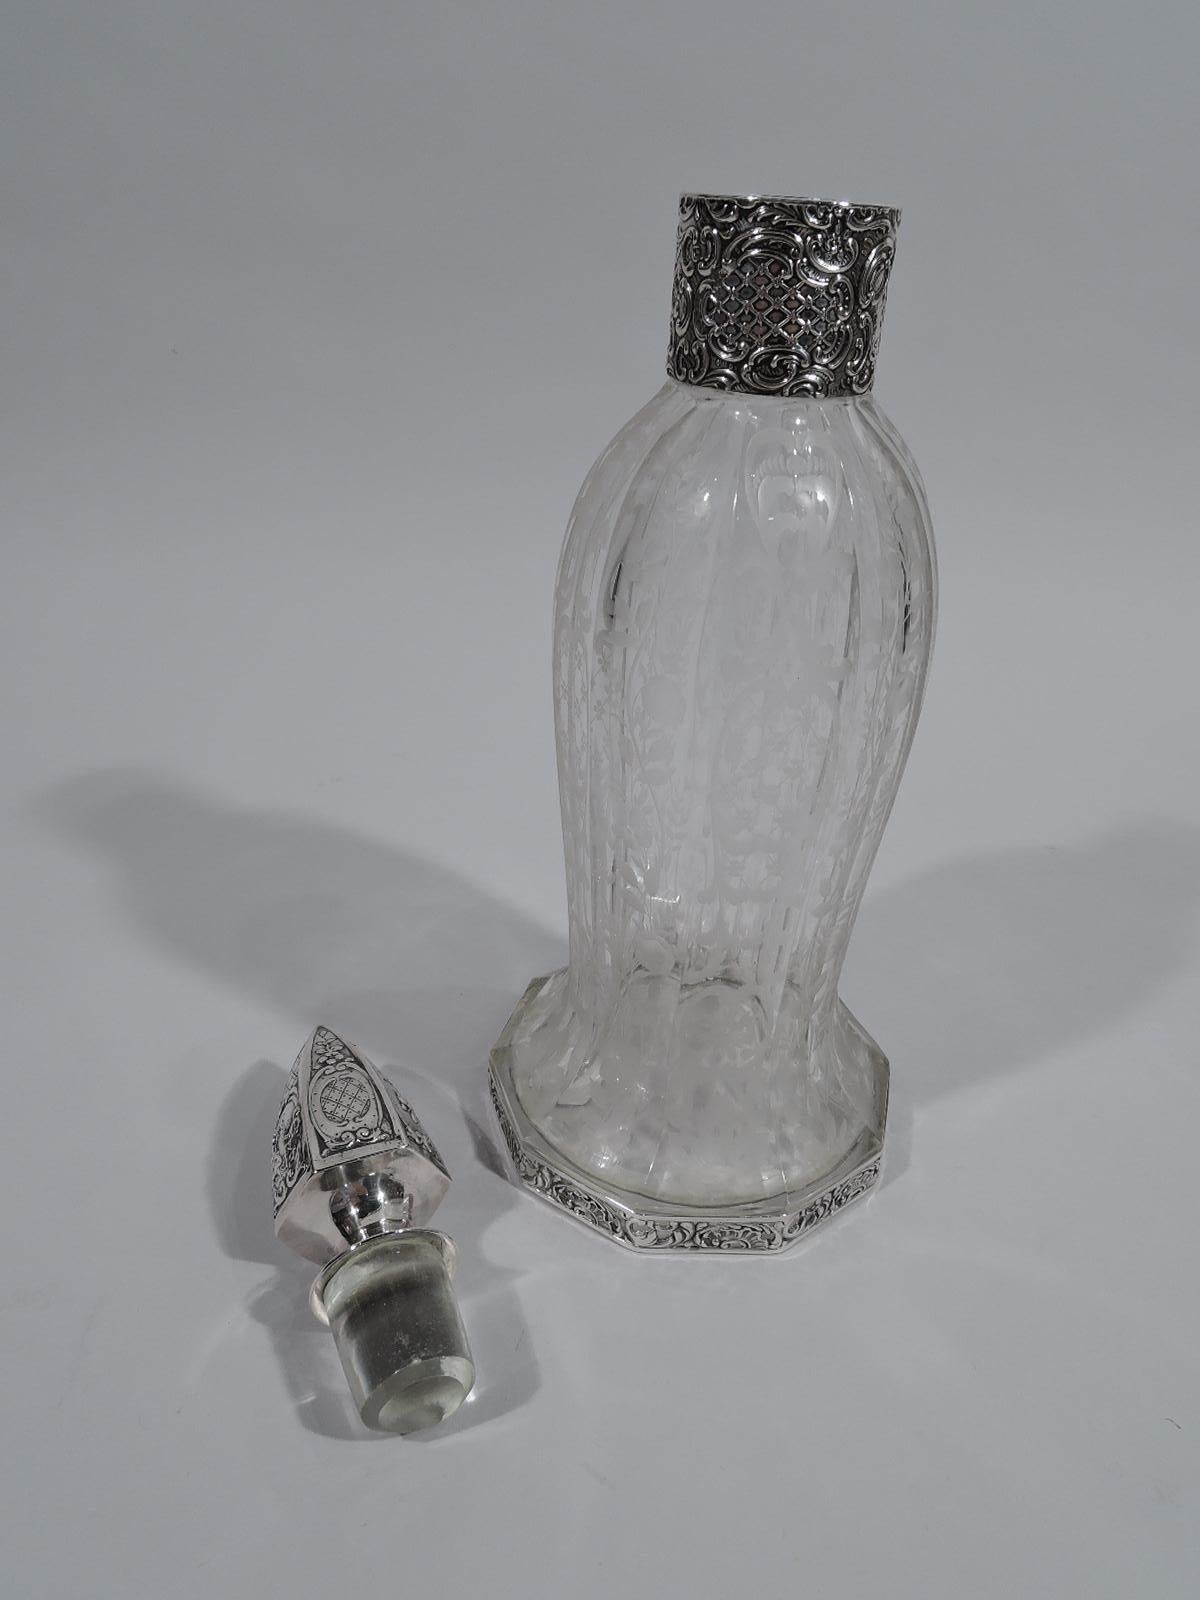 Pretty German 800 silver and crystal decanter, ca 1910. Curved and faceted crystal body flowing into spread base; acid-etched flowers, leaves, and scrolls. Drum-form neck in silver collar with tooled flowers and scrolls. Silver ovoid and faceted